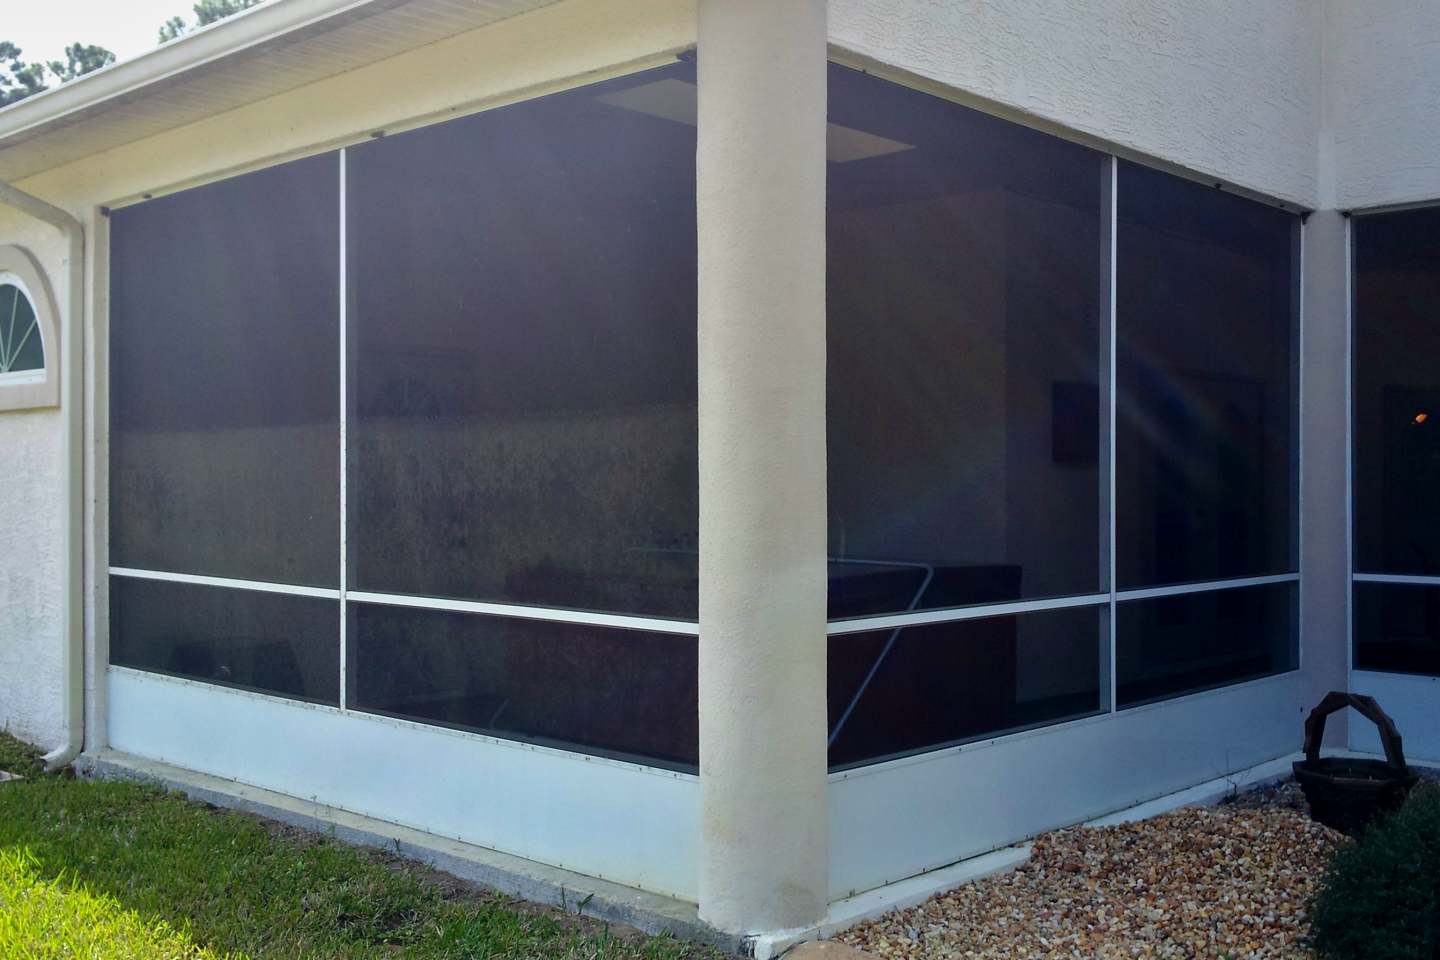 01-before-install-florida-glass-privacy-screen.jpg